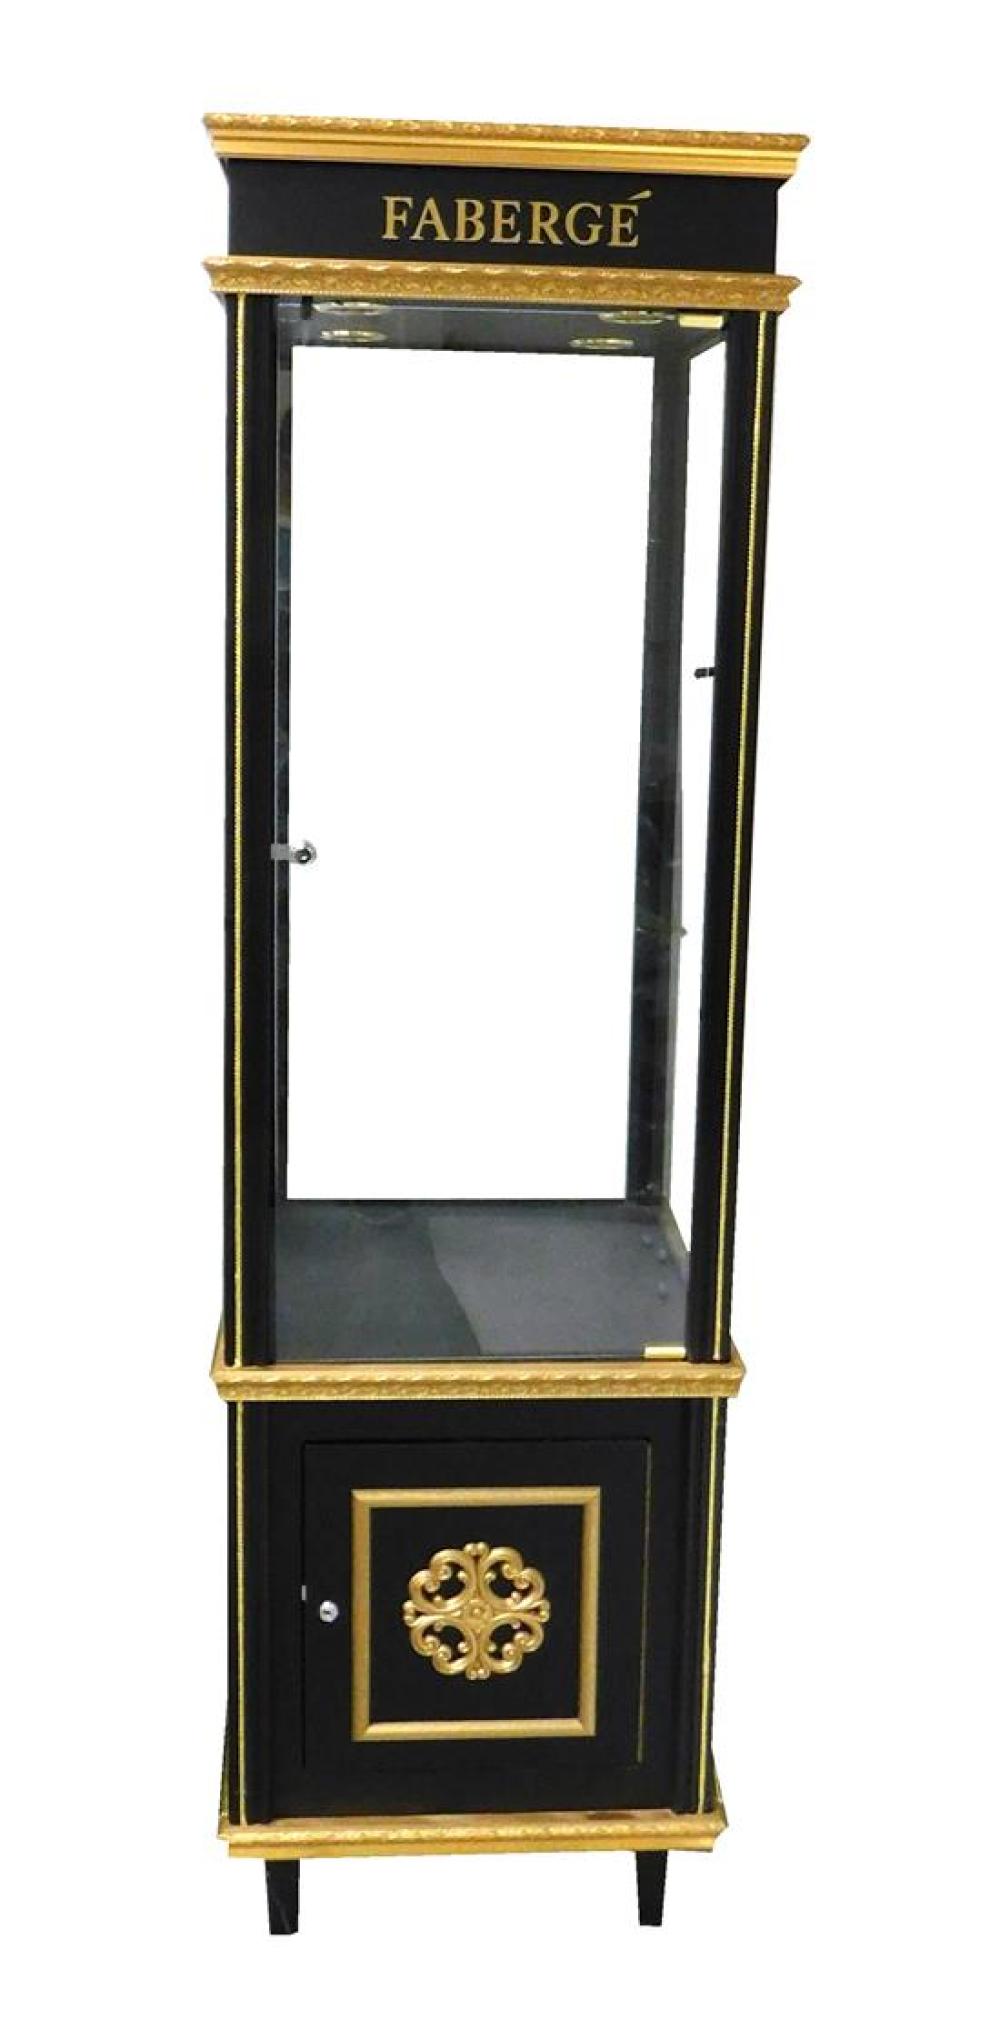 CONTEMPORARY TALL RETAIL DISPLAY 31bb55